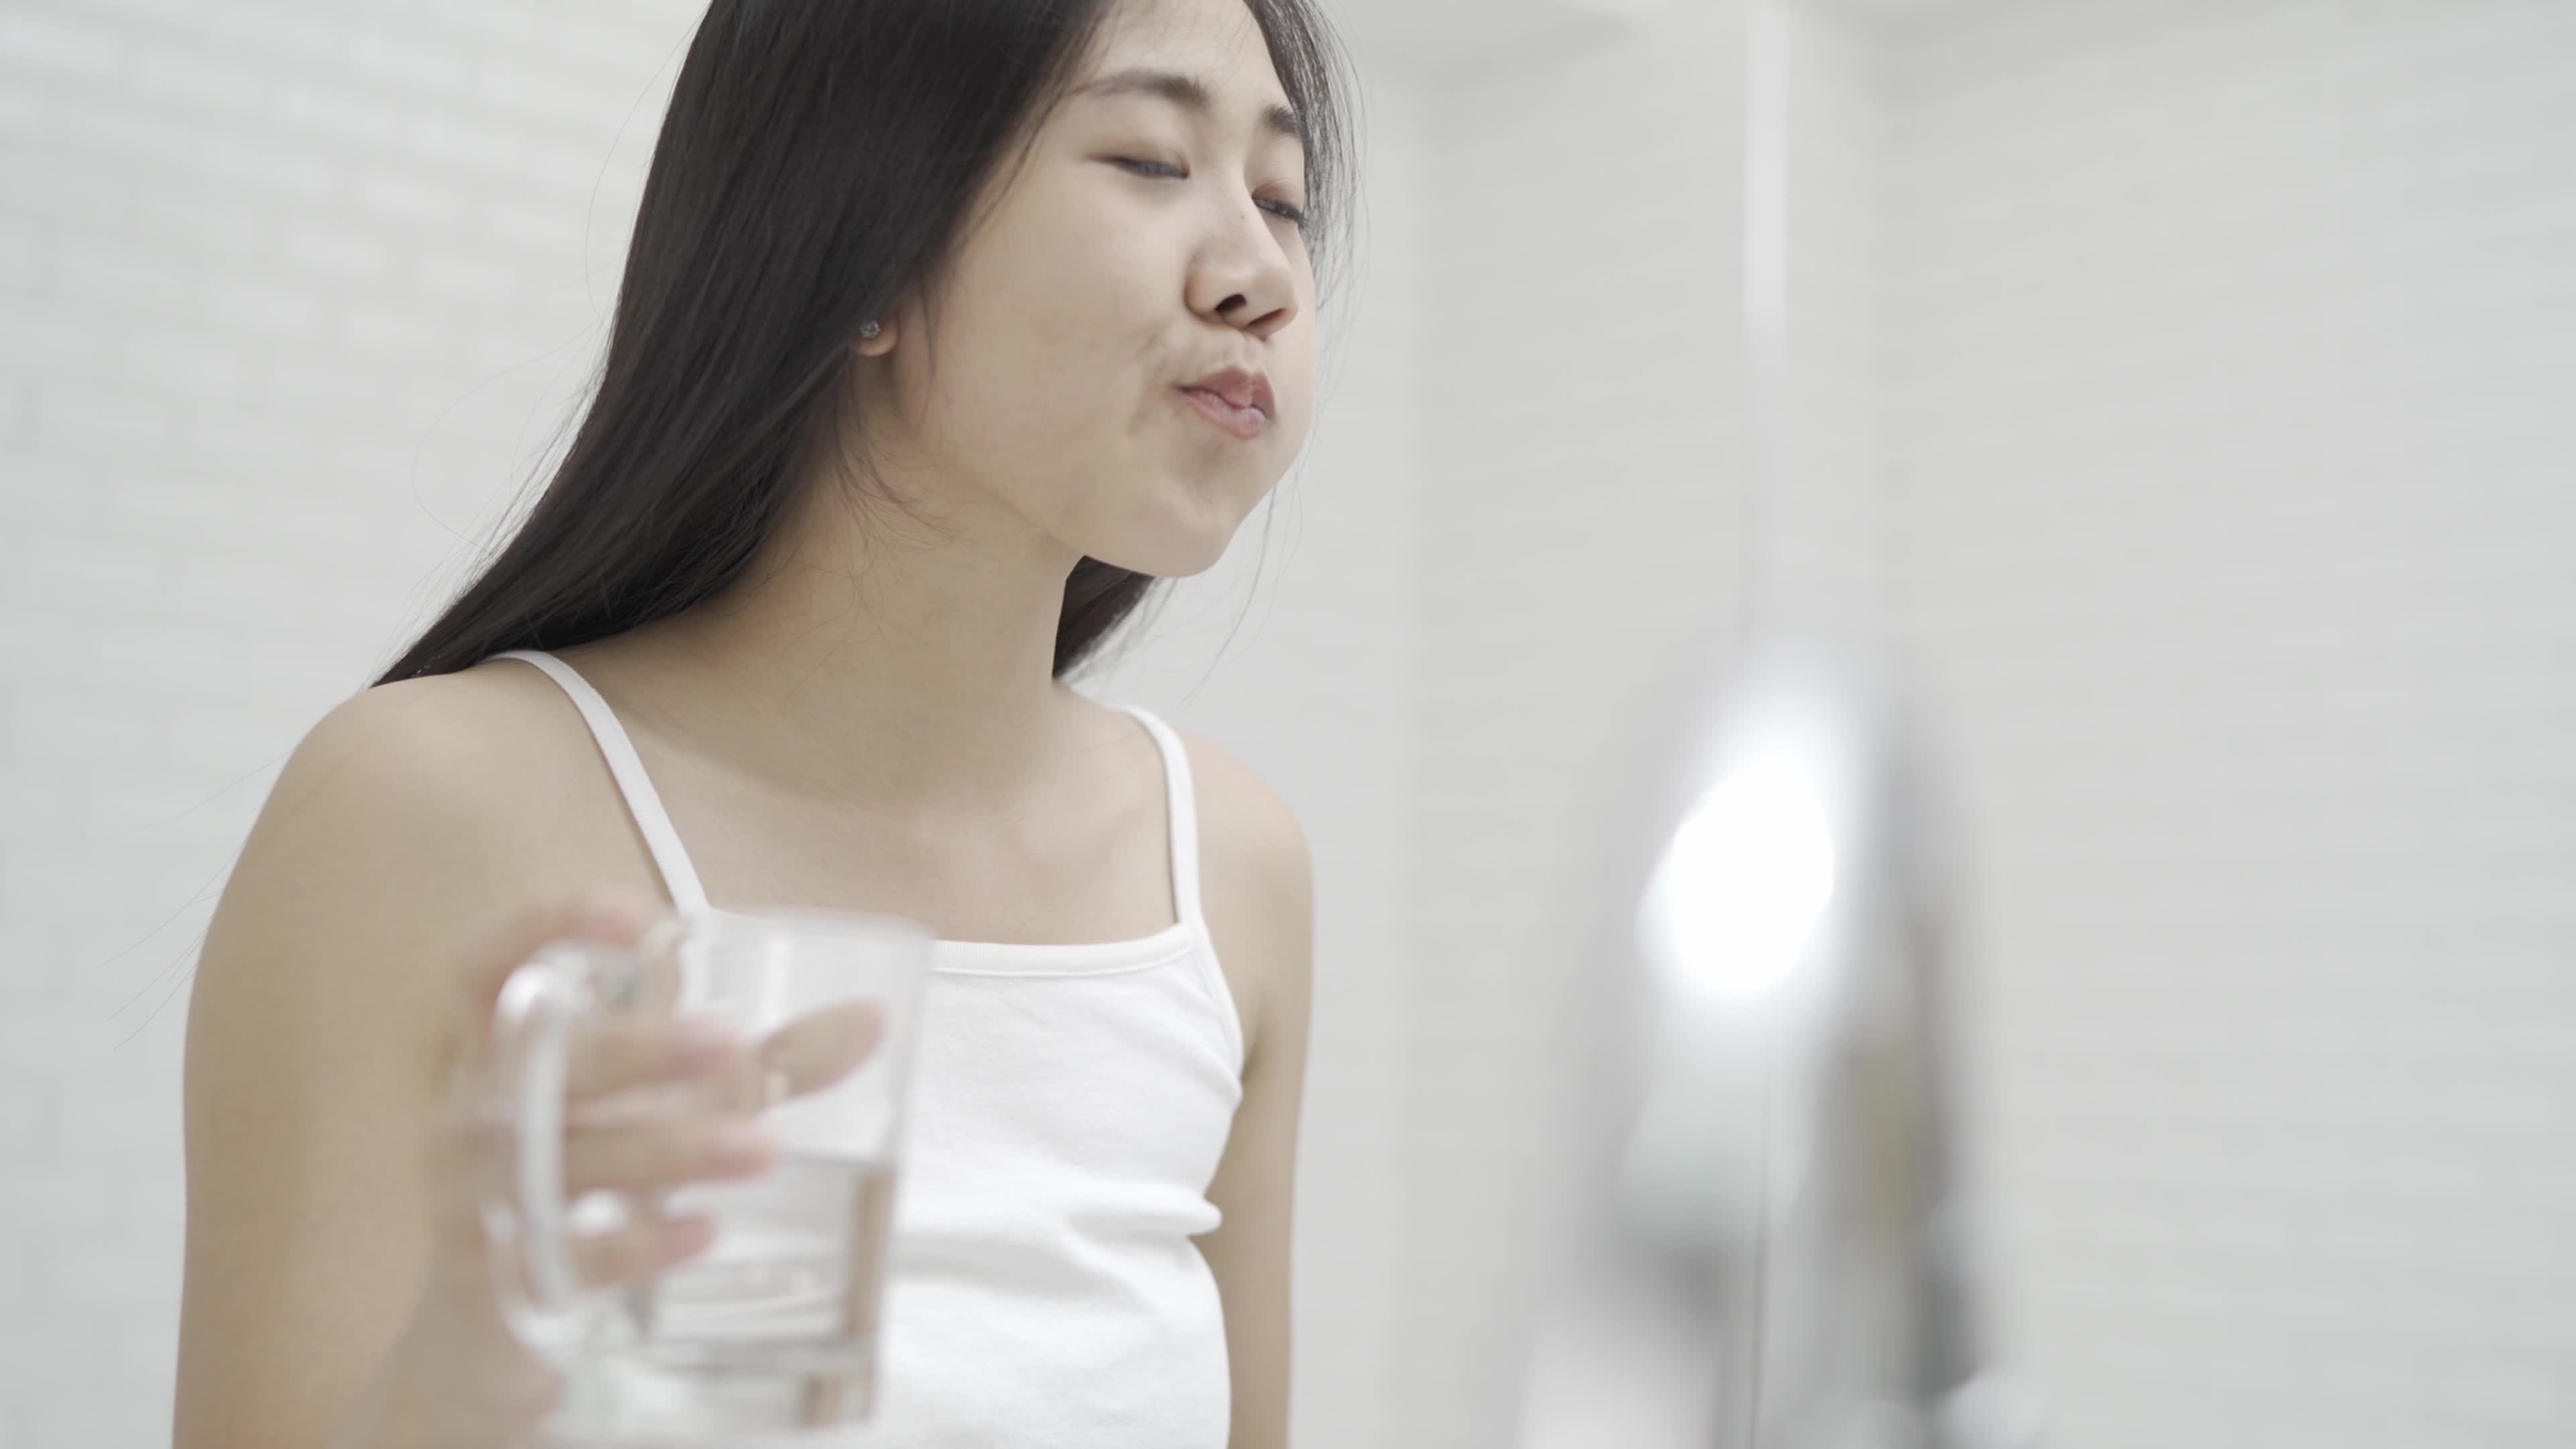 A cute Asian woman brushing her teeth and gargling in front of the mirror after waking up every morning. pic